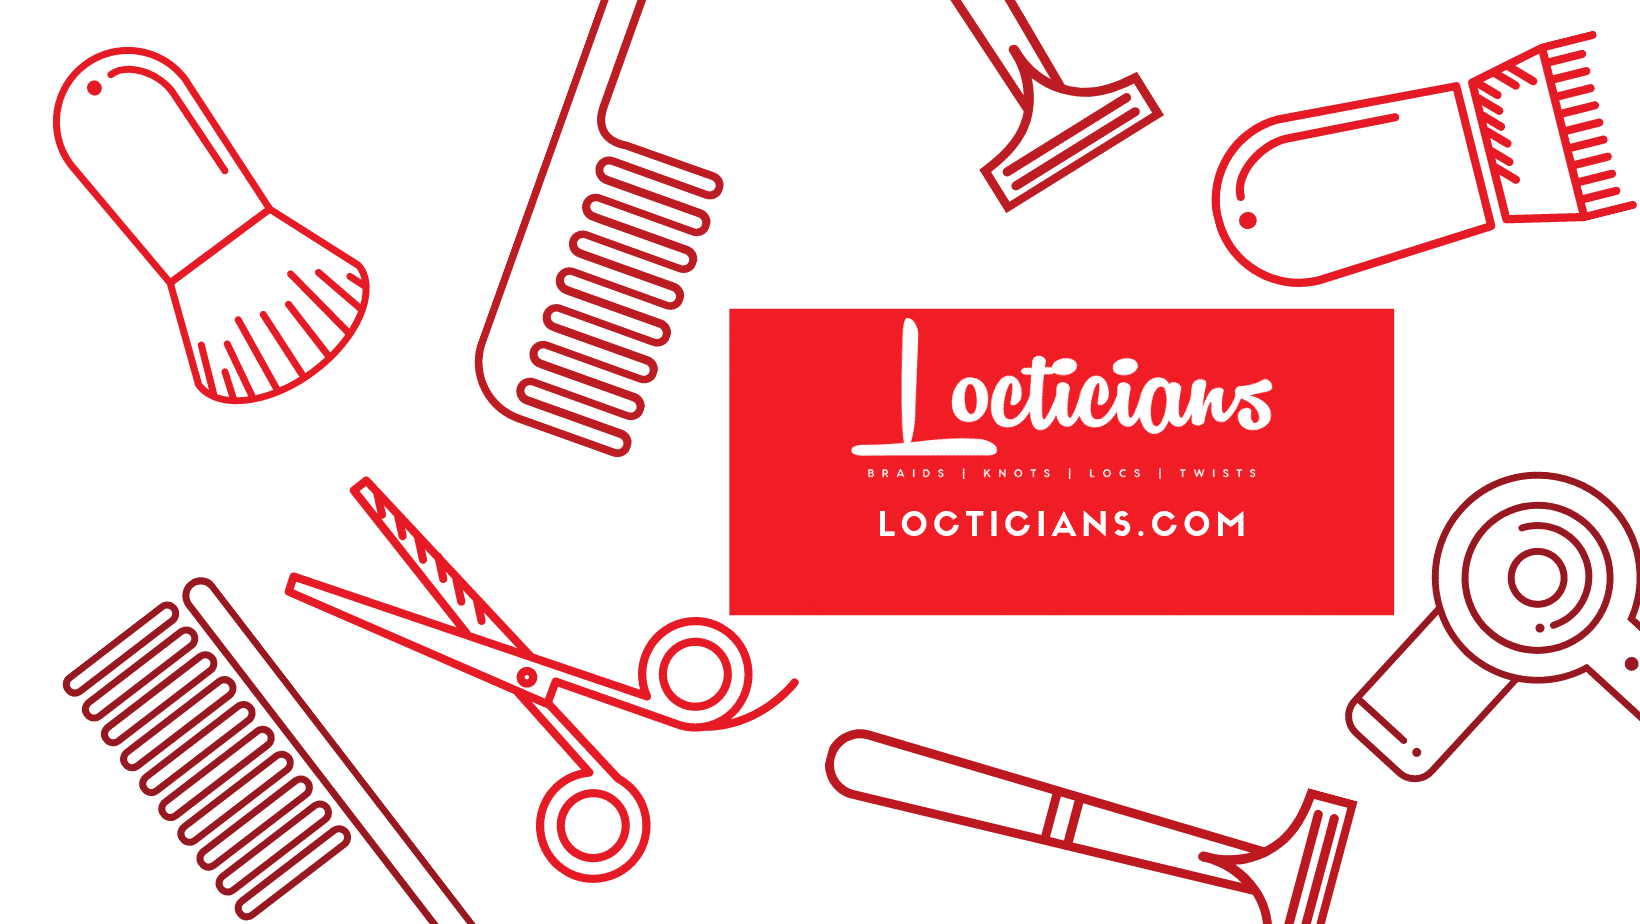 Welcome to the Locticians Community and Directory!